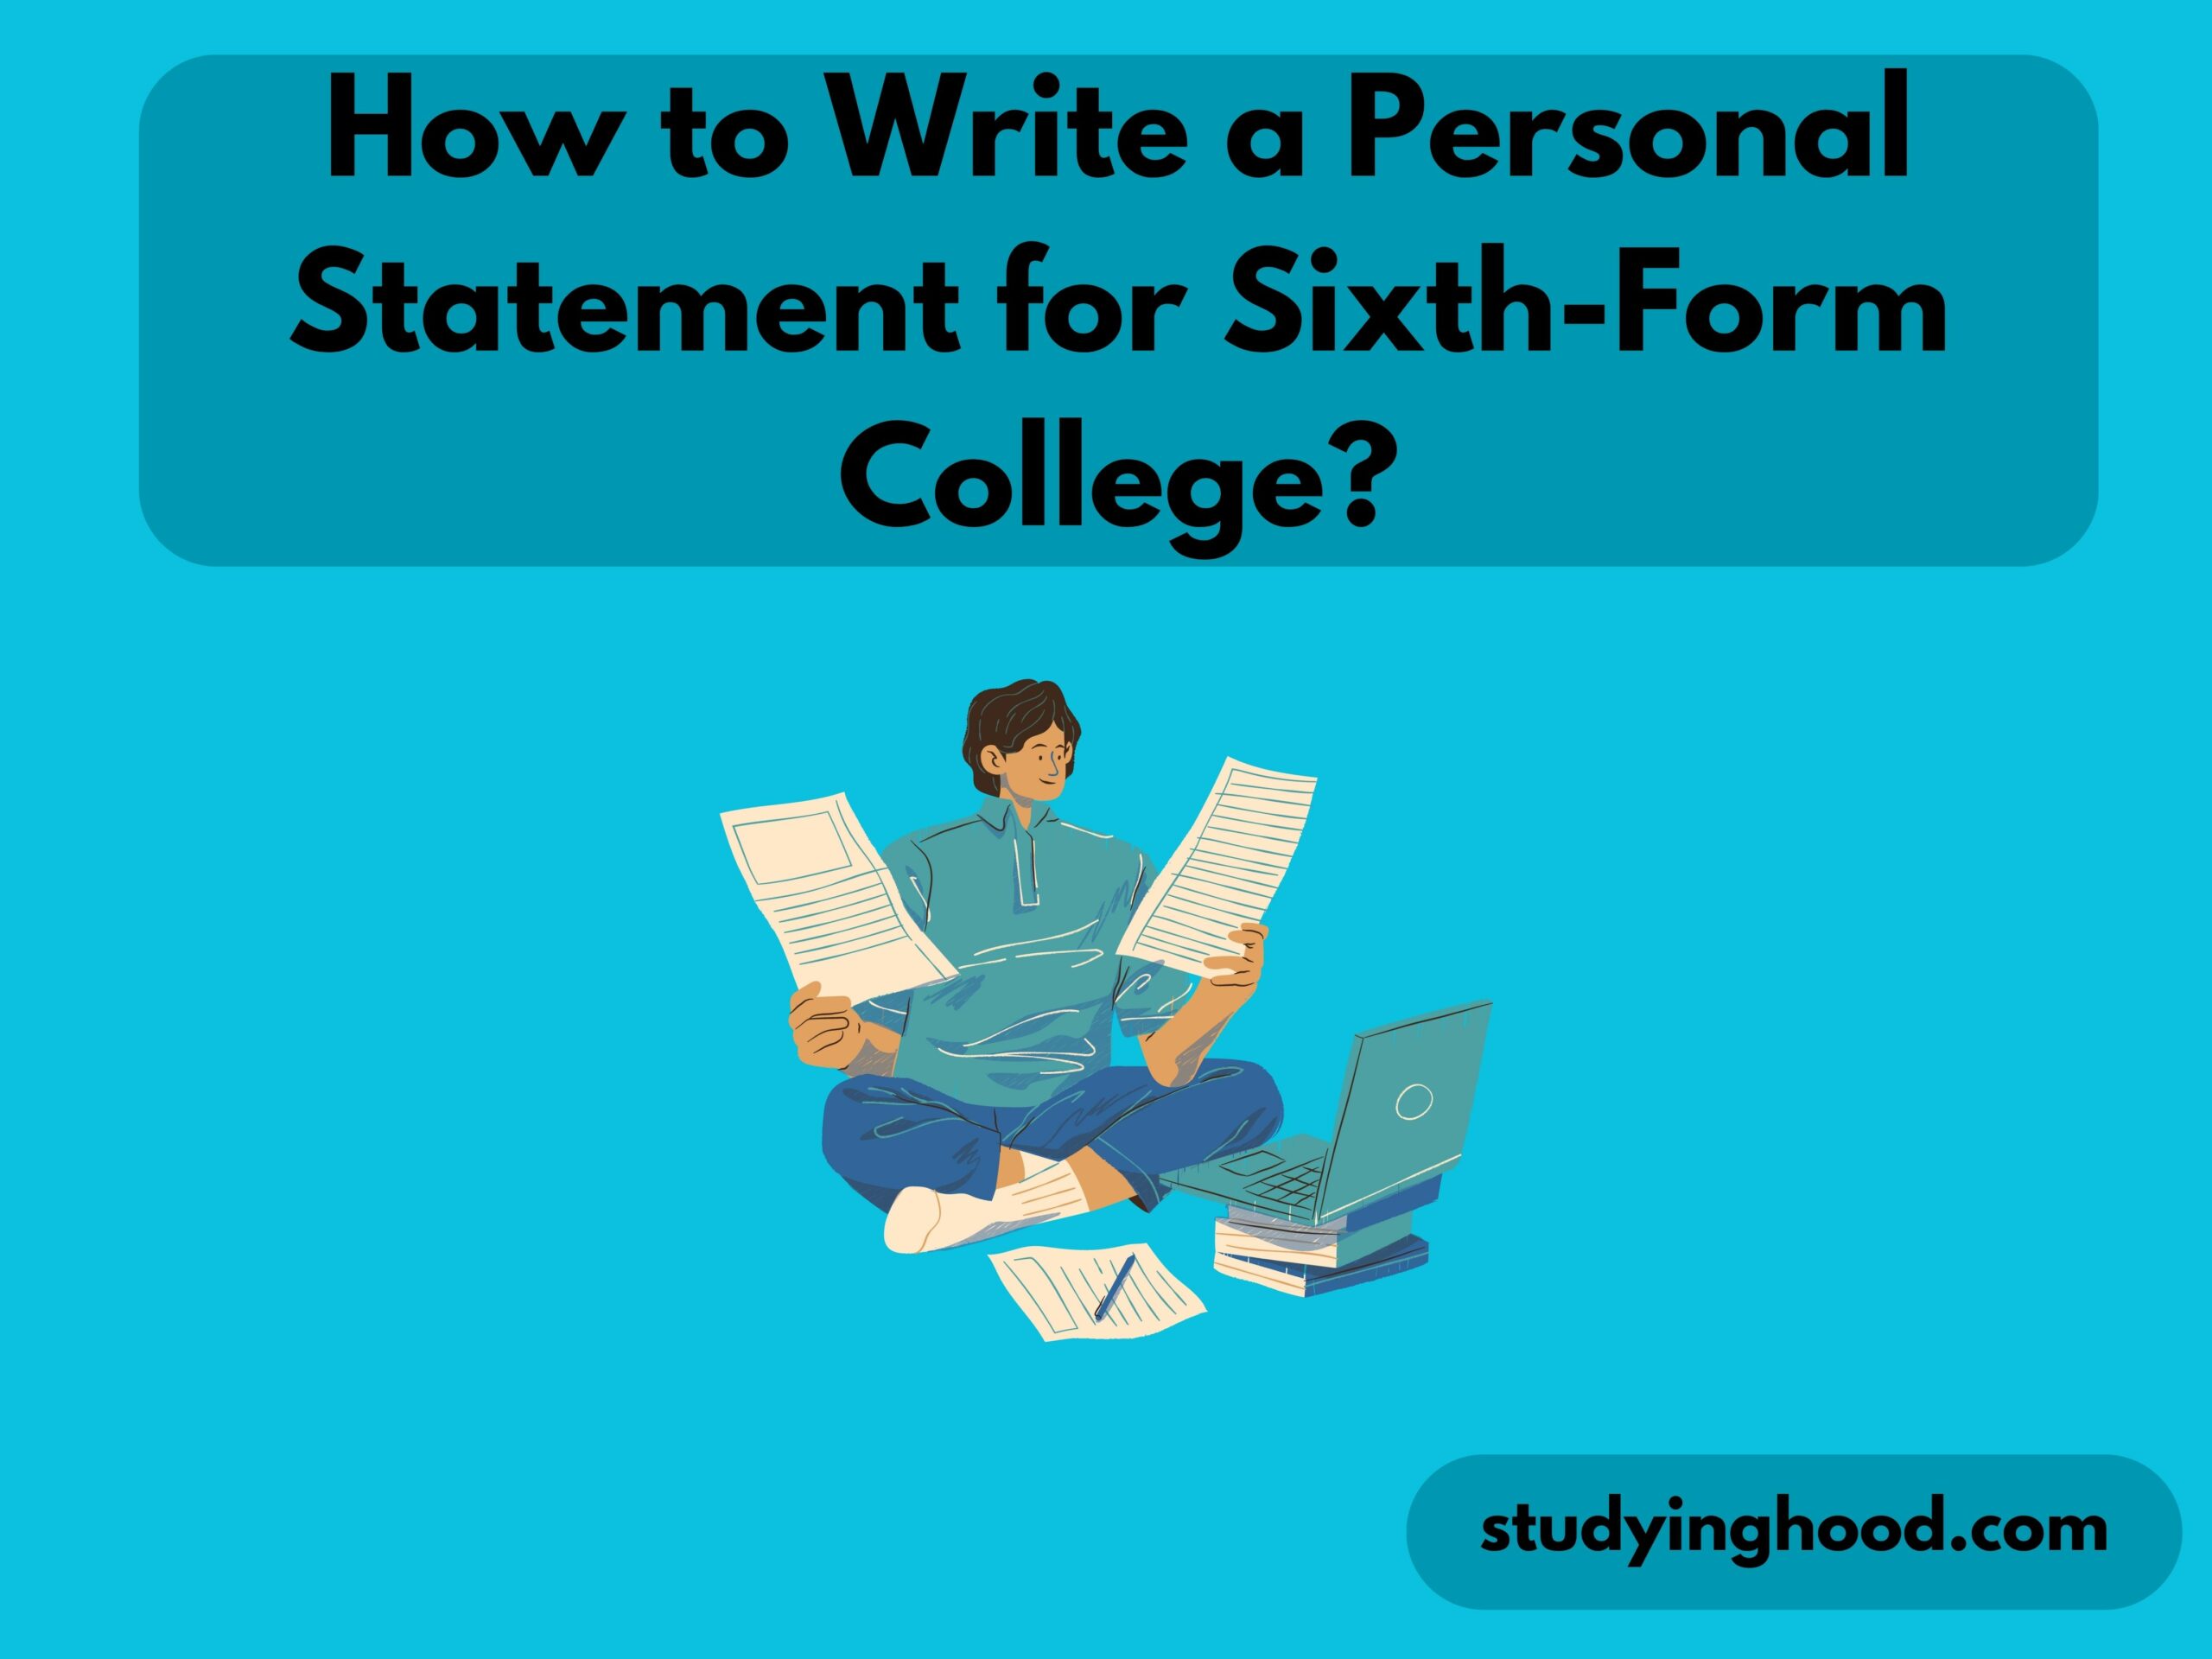 How to Write a Personal Statement for Sixth-Form College